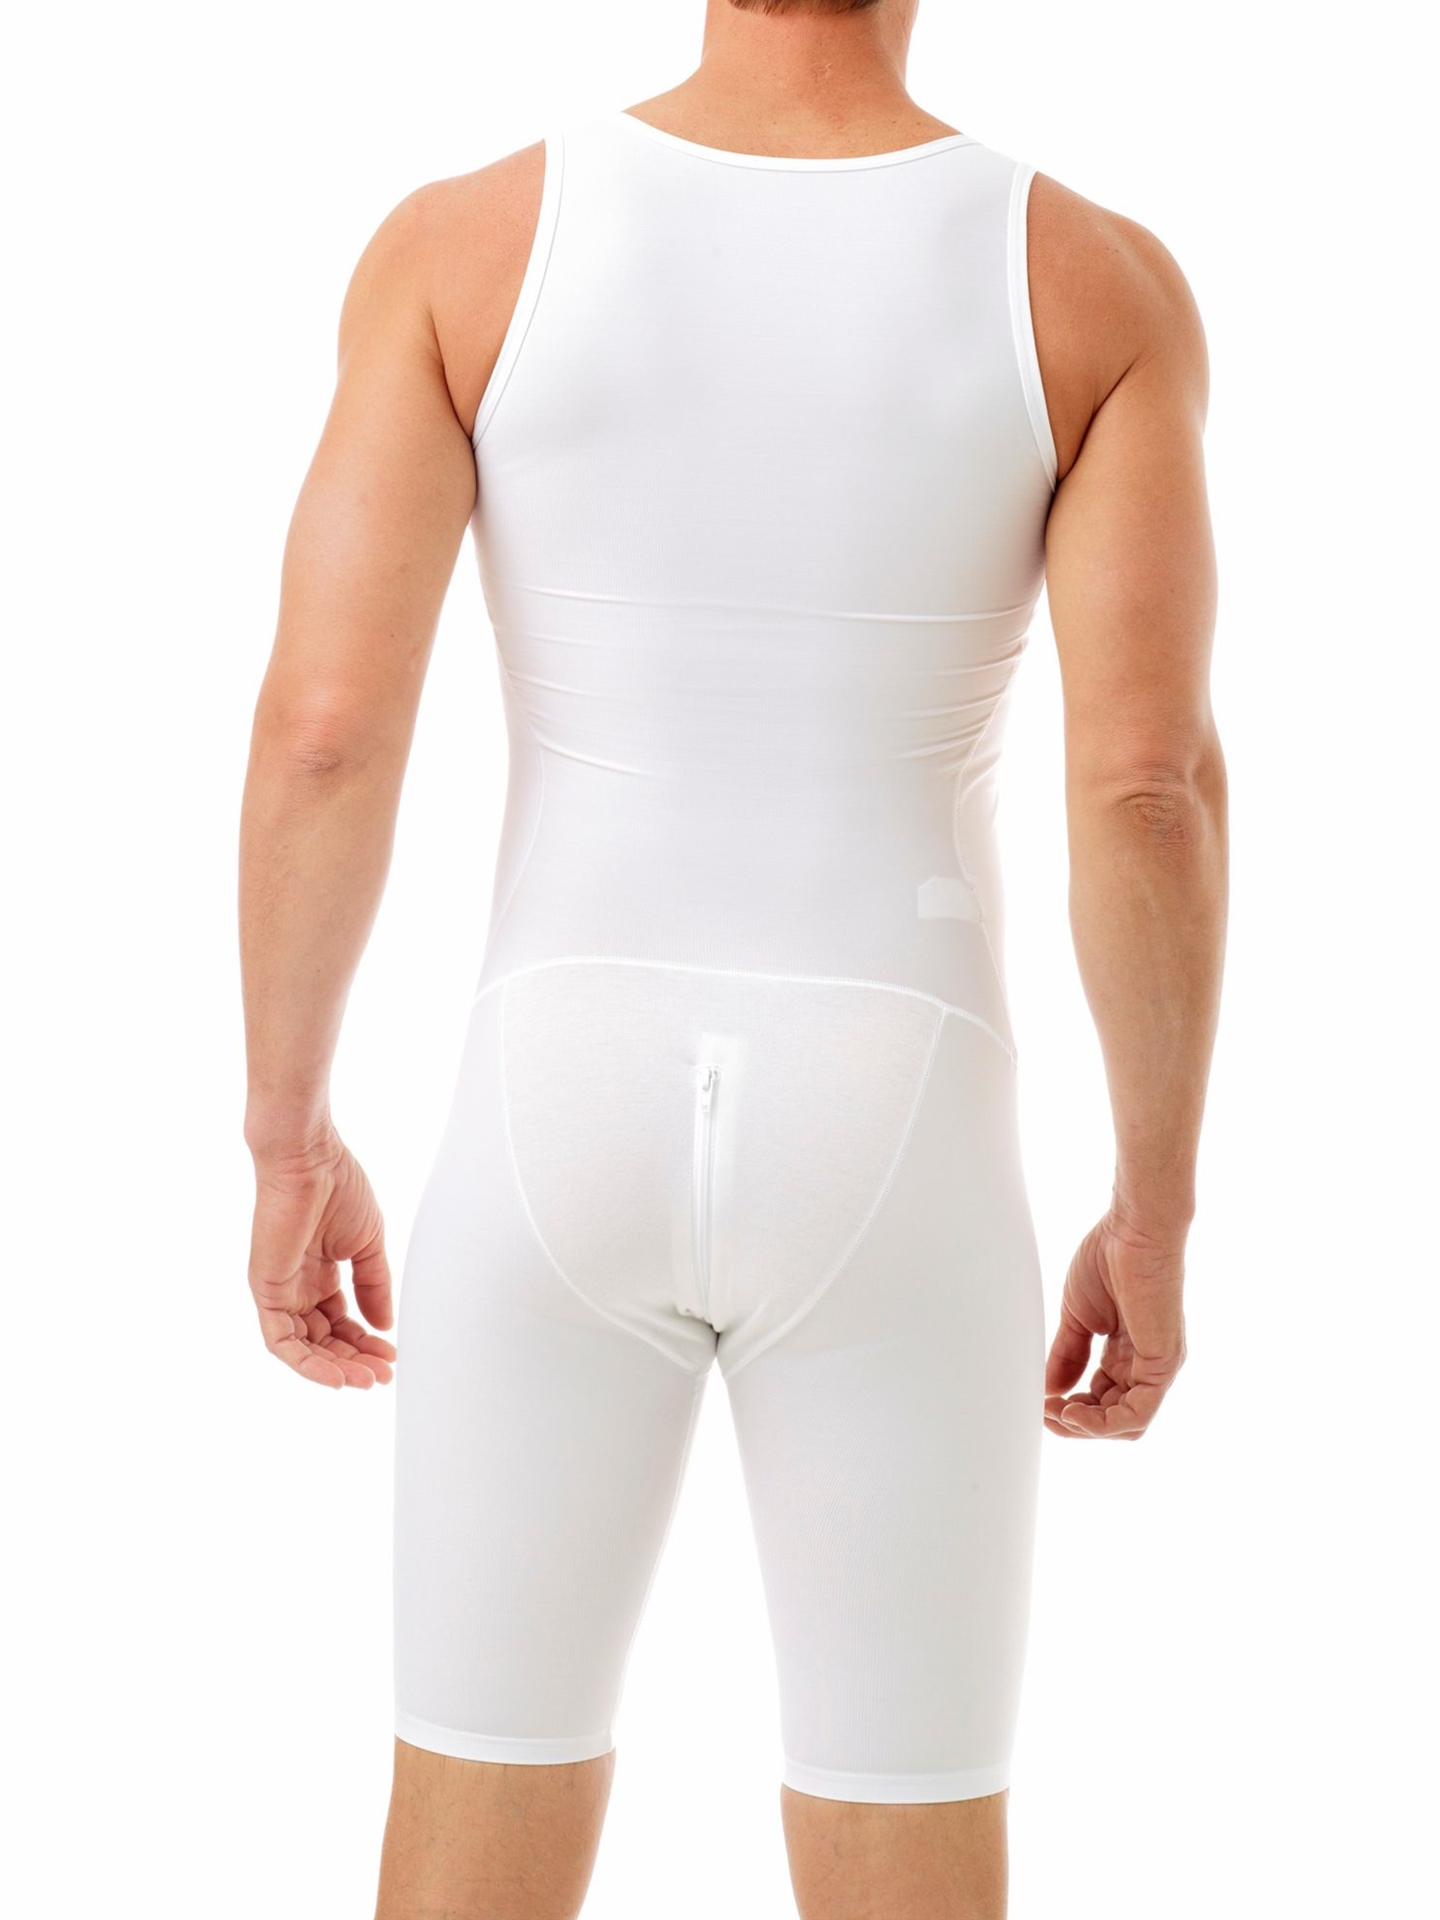 https://www.underworks.com/images/thumbs/0000216_mens-compression-bodysuit-with-rear-zipper.jpeg